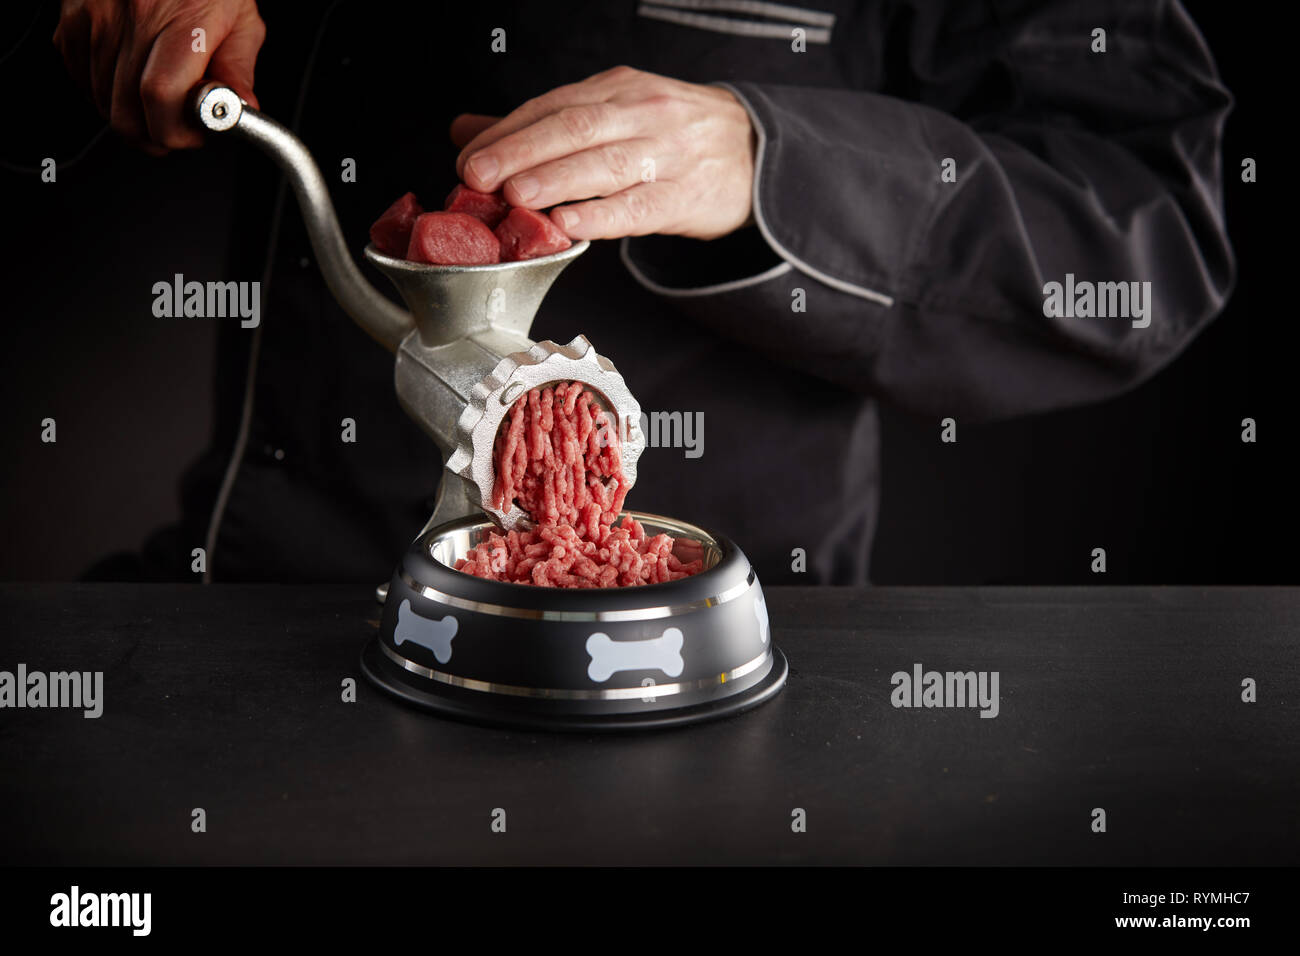 Man making minced meat for dog, pushing it through old metal manual meat grinder into dog bowl, viewed against black background in close-up Stock Photo